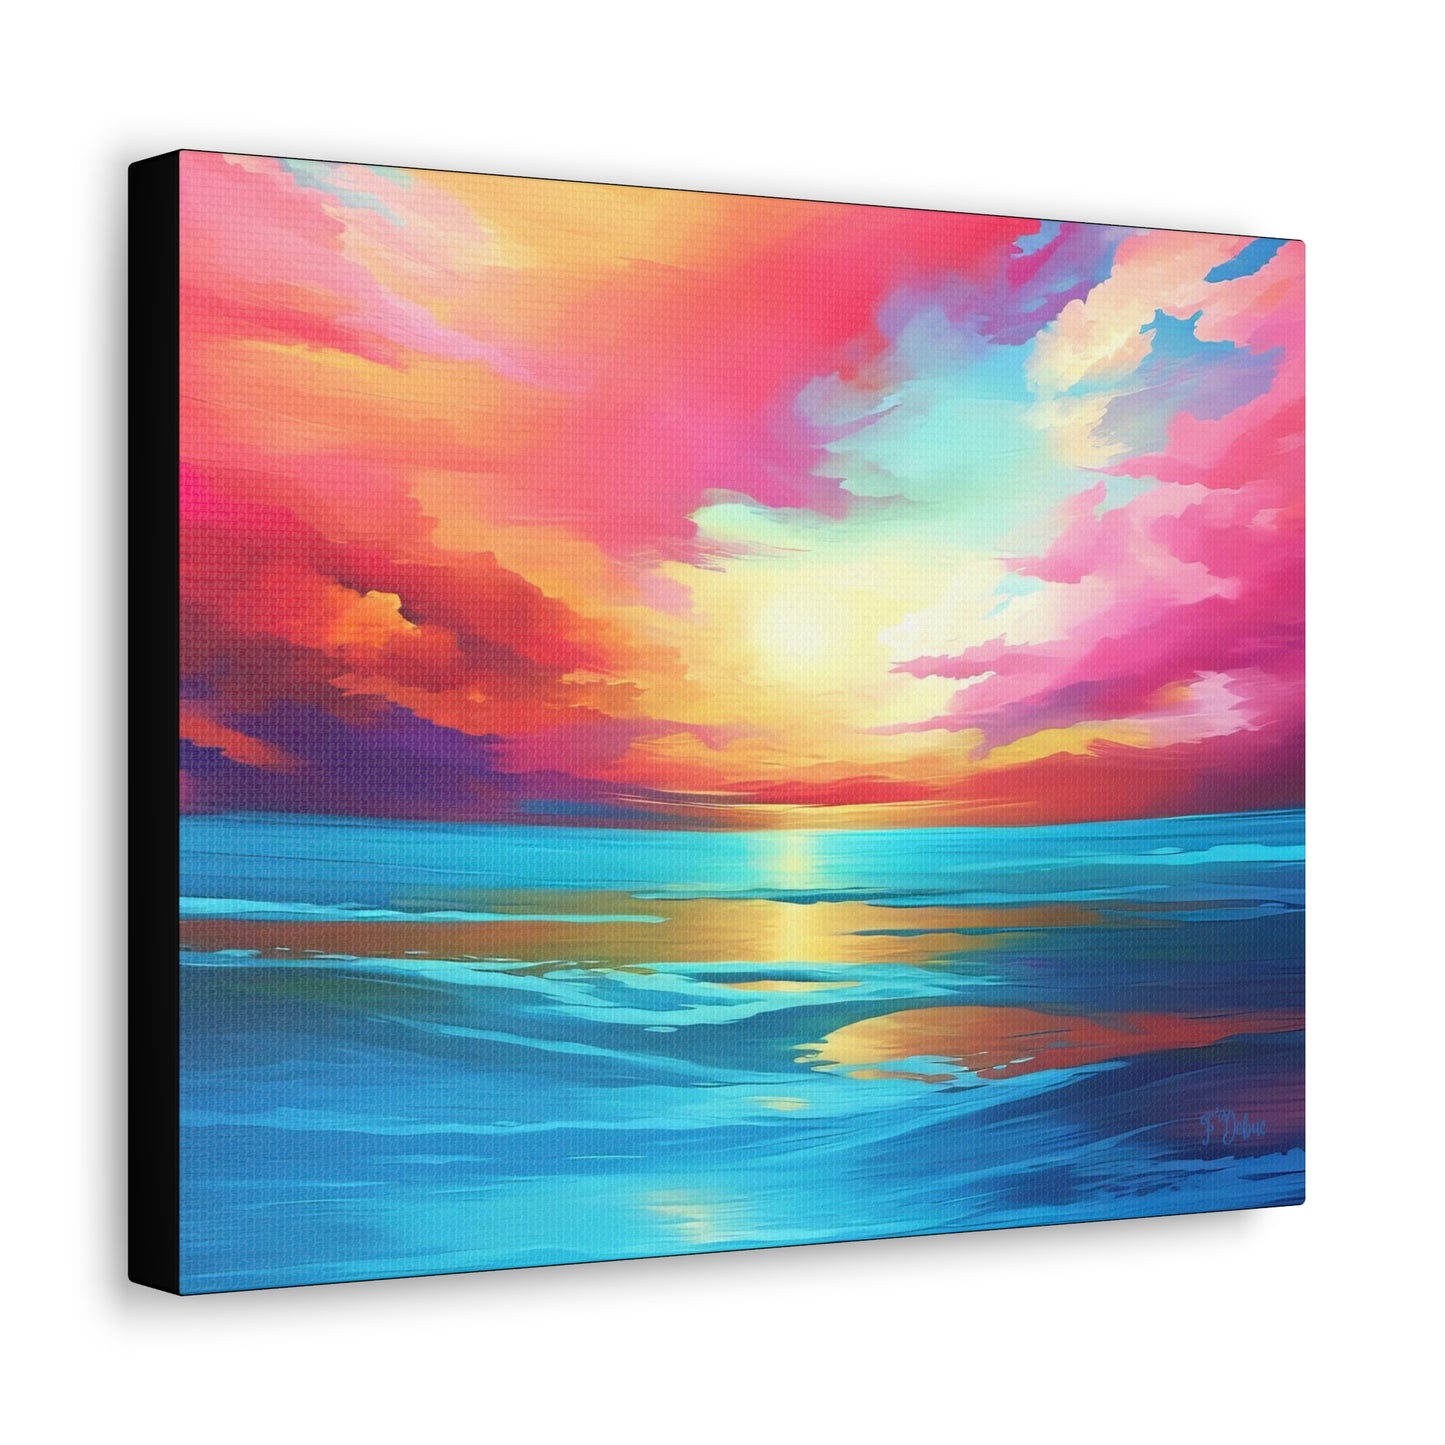 Turquoise Tides - Canvas Wall Art